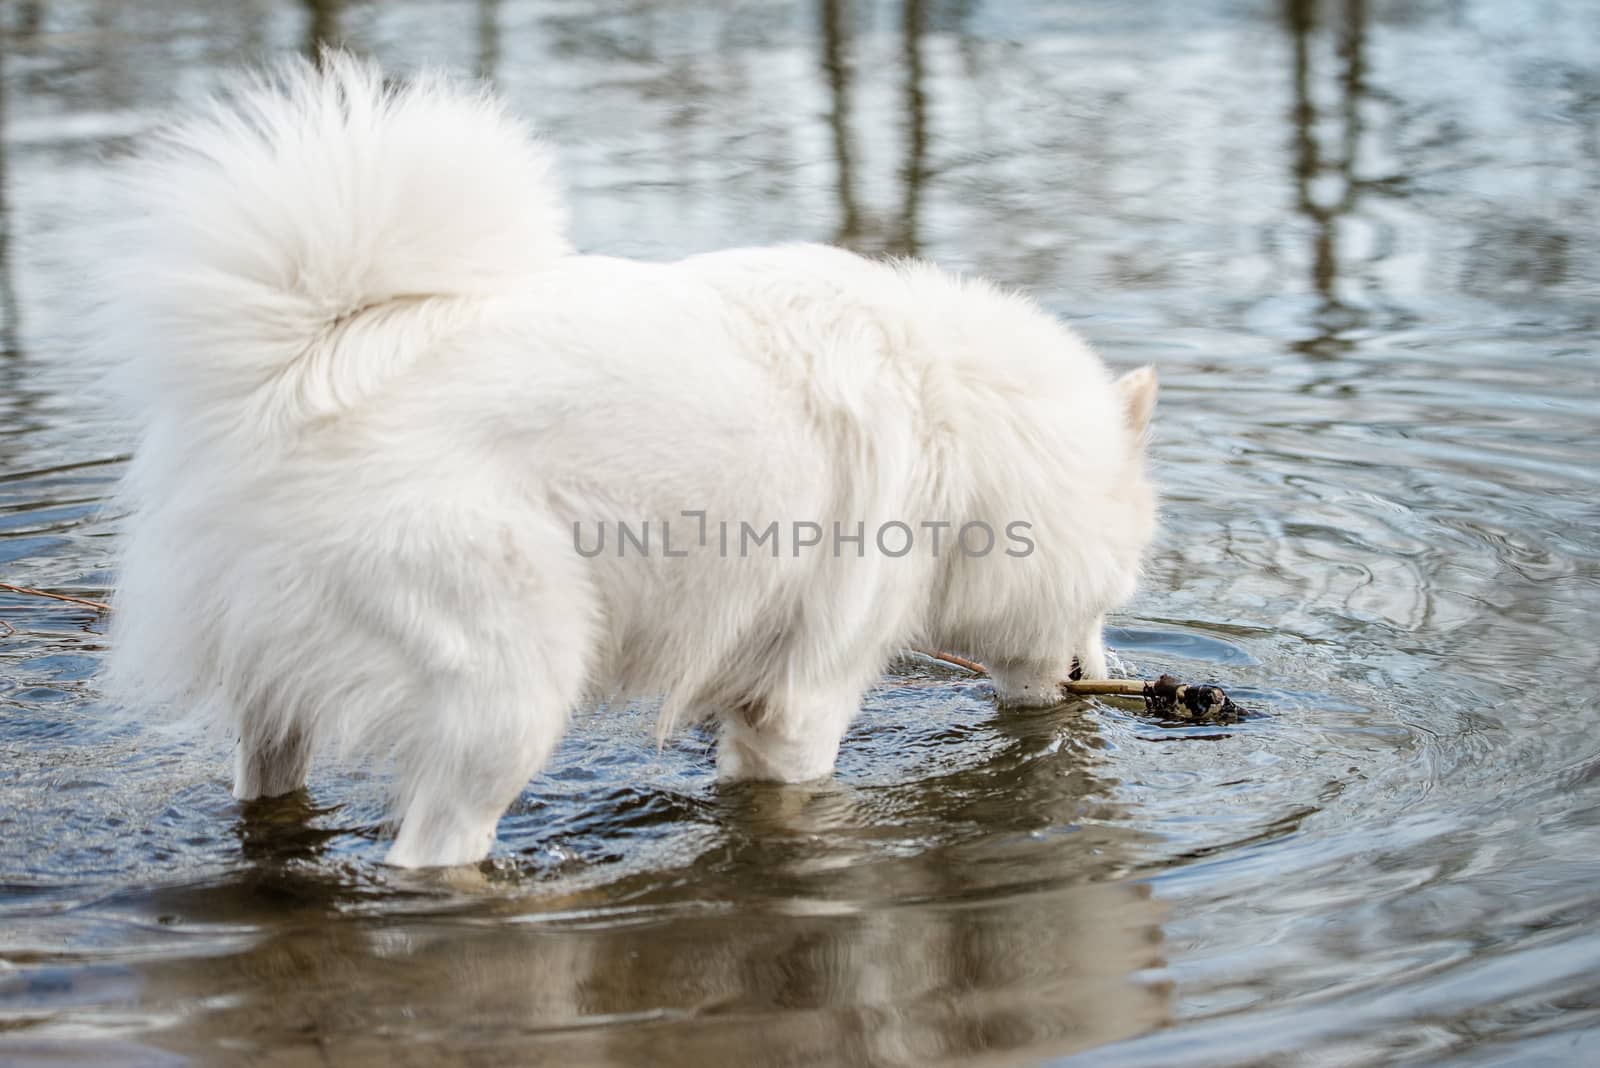 Cute, fluffy white Samoyed dog grabs a stick from the water in a pond at the dog park